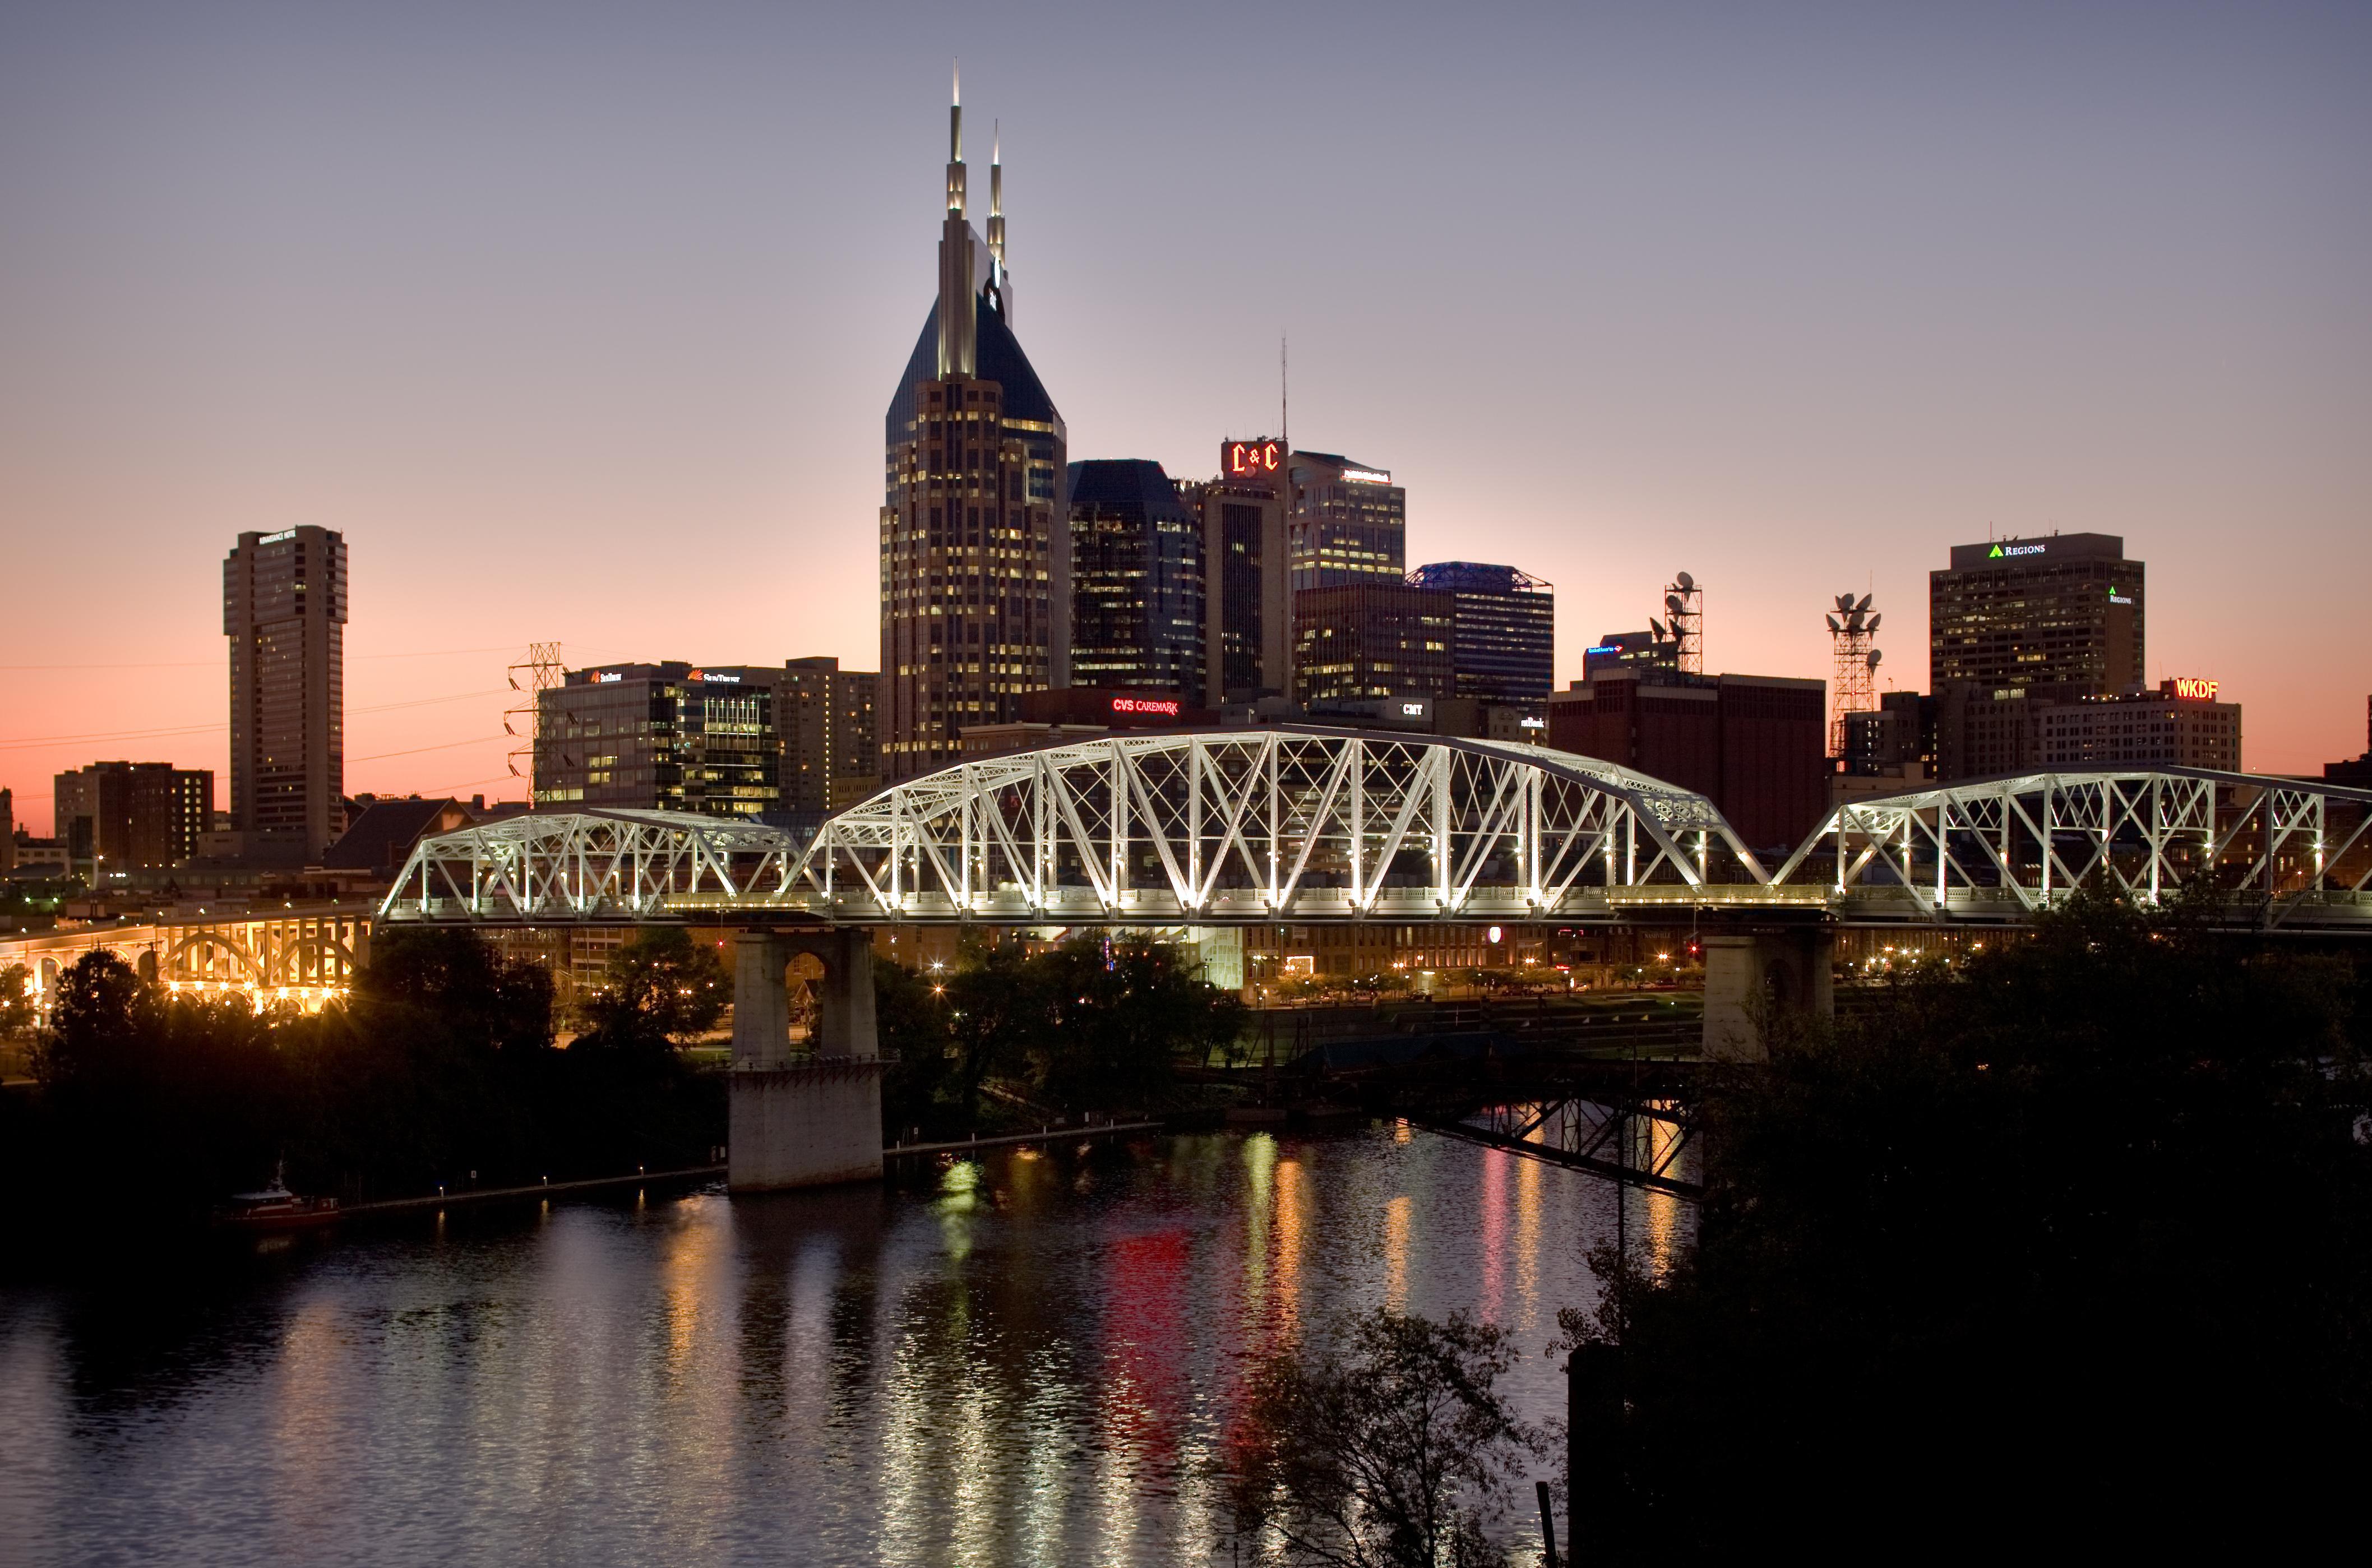 Nashville Wallpapers and Backgrounds Image.